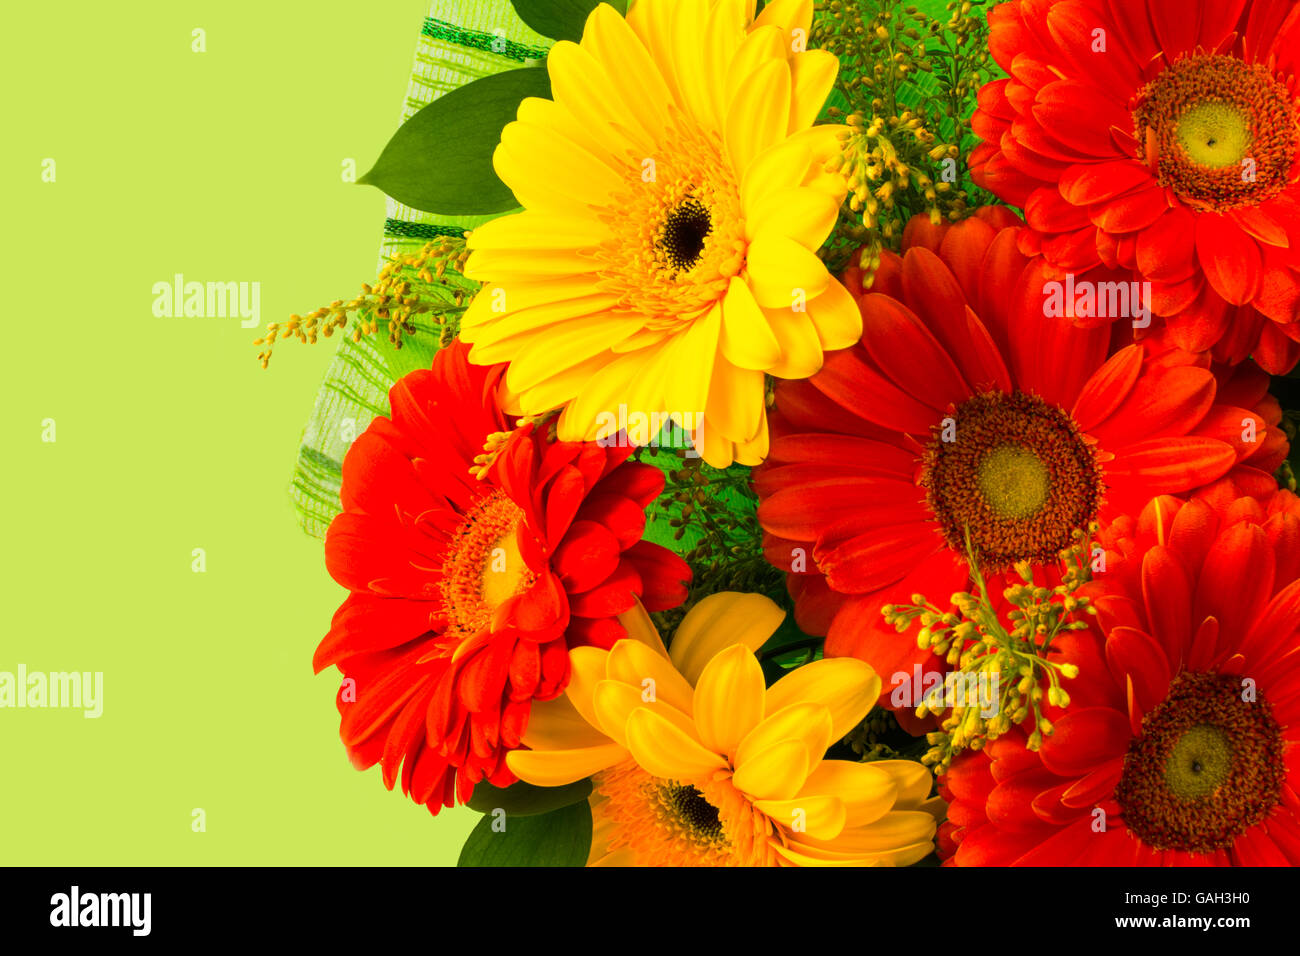 Red and yellow daisy bouquet on green background. Greeting background. Flowers greeting card. Greeting card. Happy Mother's Day. Stock Photo